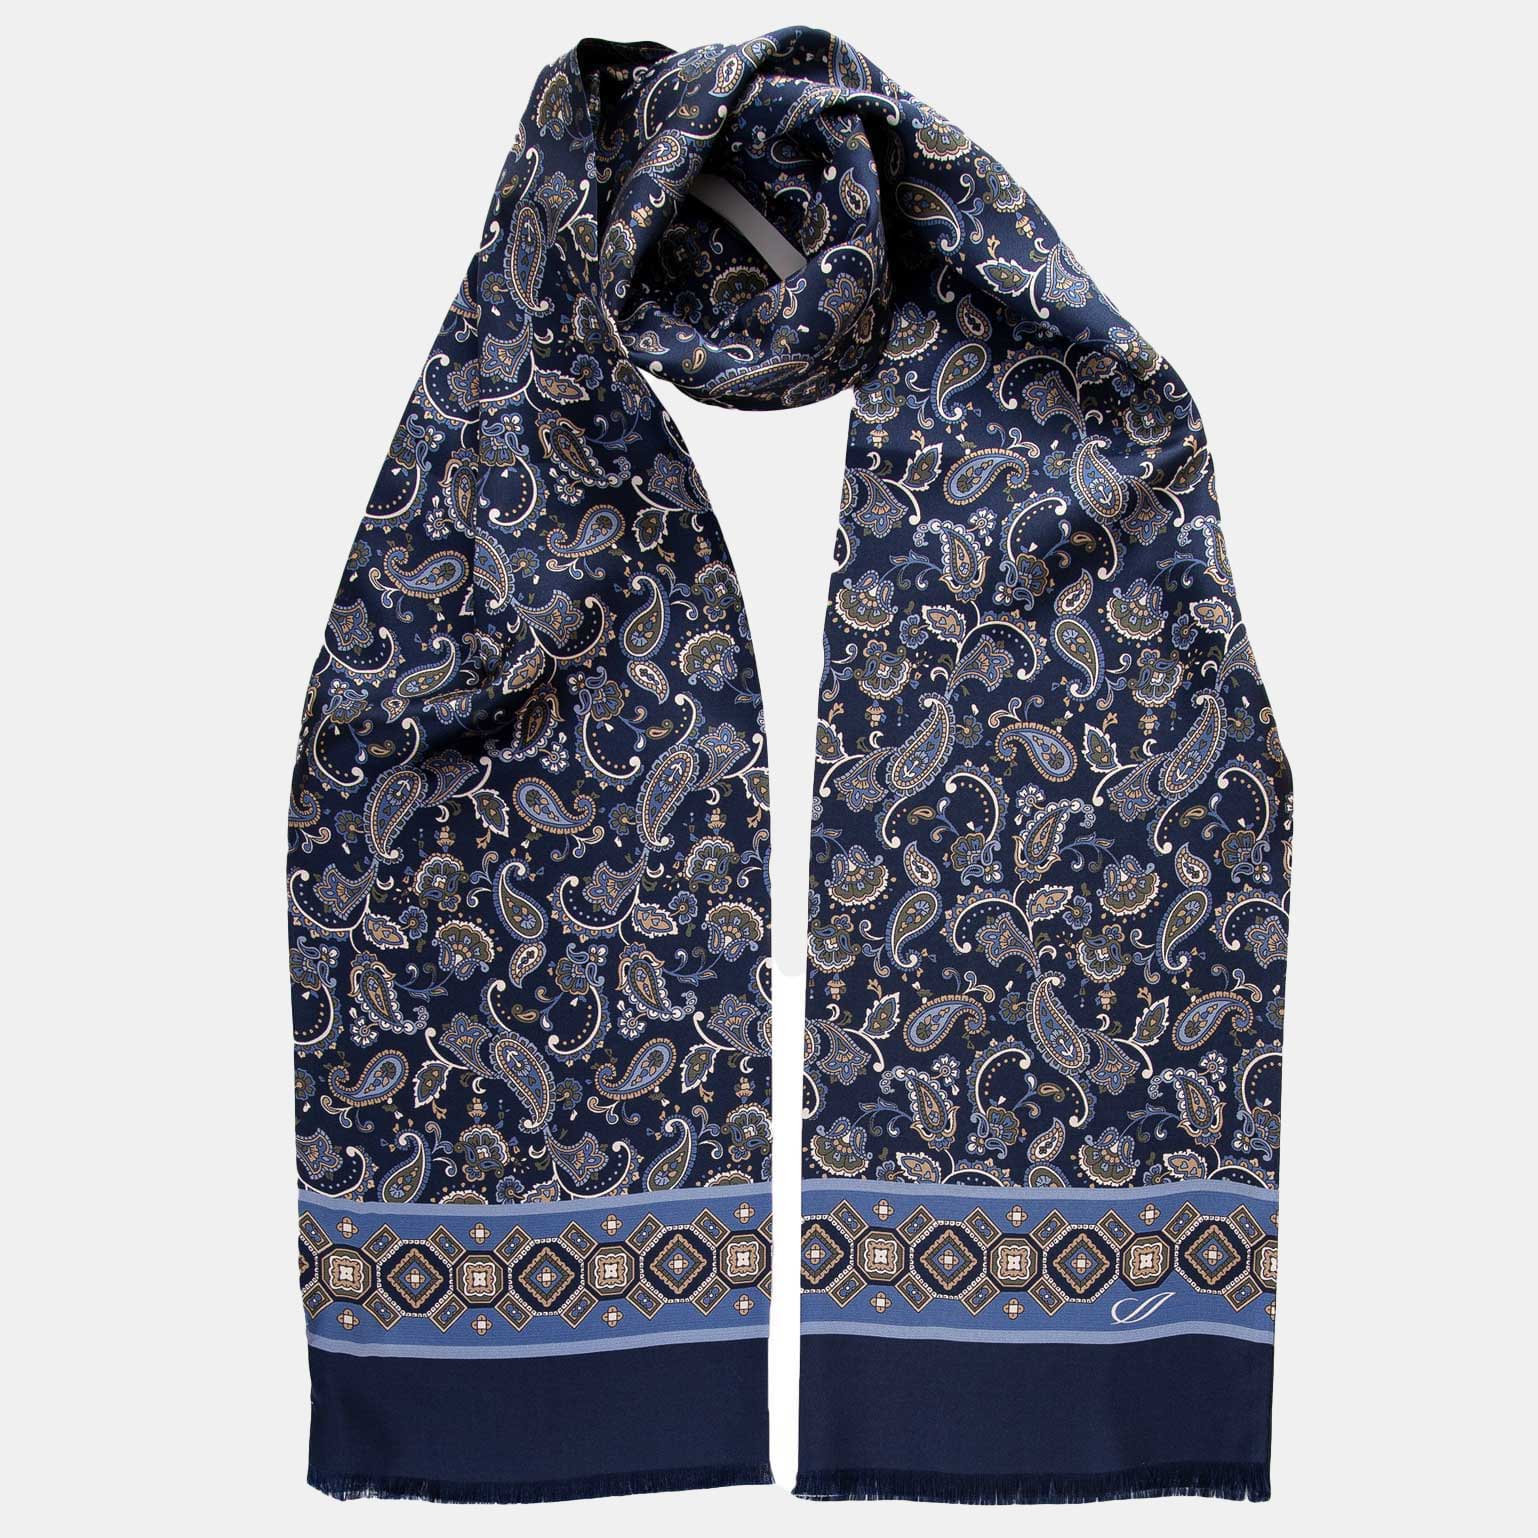 CUDDLE DREAMS Luxurious Men's Silk Scarves for Winter, 2-Layer